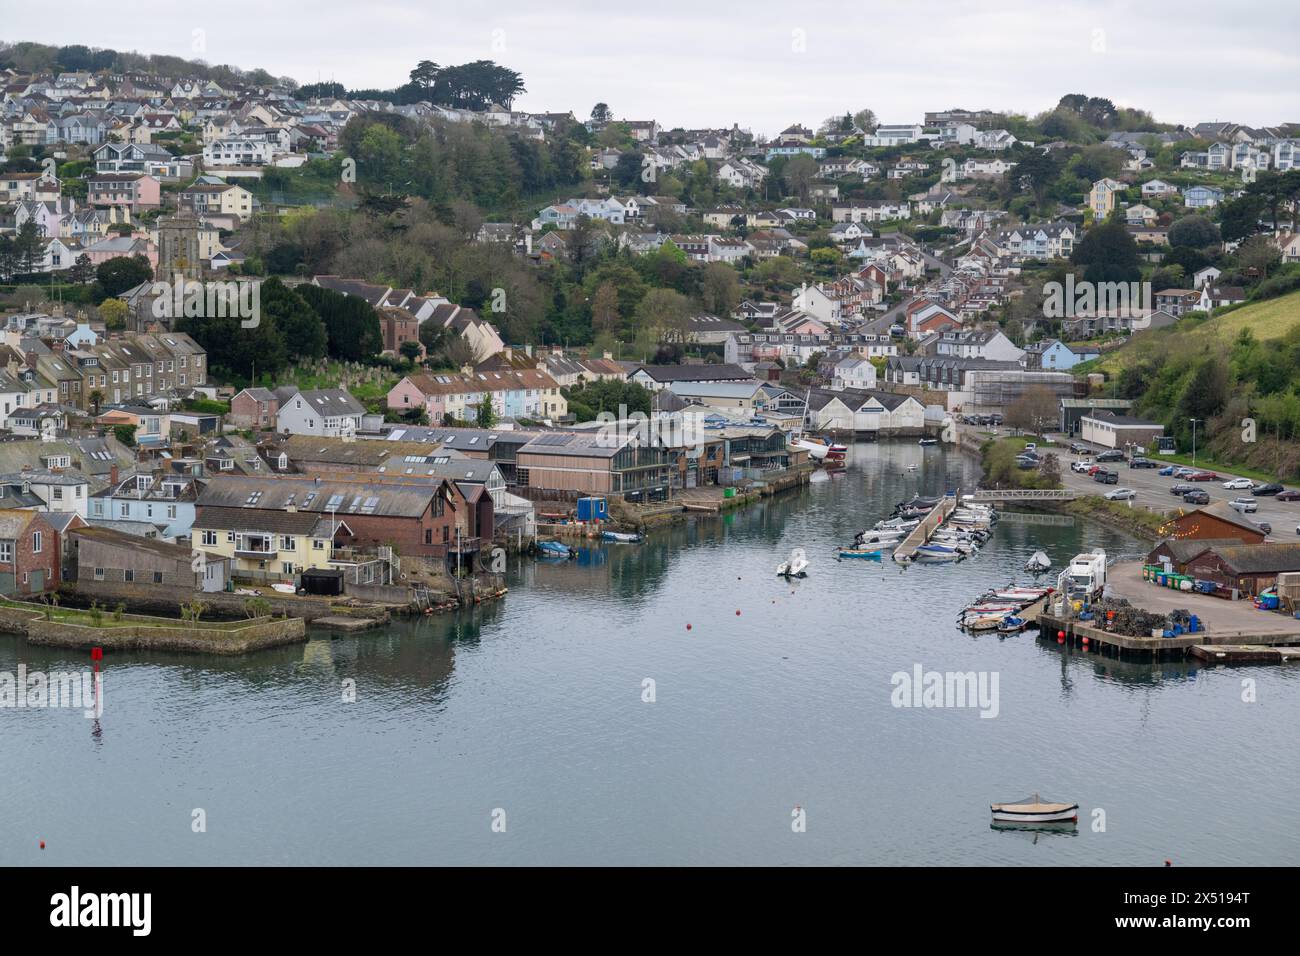 View from Snapes Point looking toward Batson Creek with Salcombe town, Church and boatyards in view, on calm spring day. Stock Photo